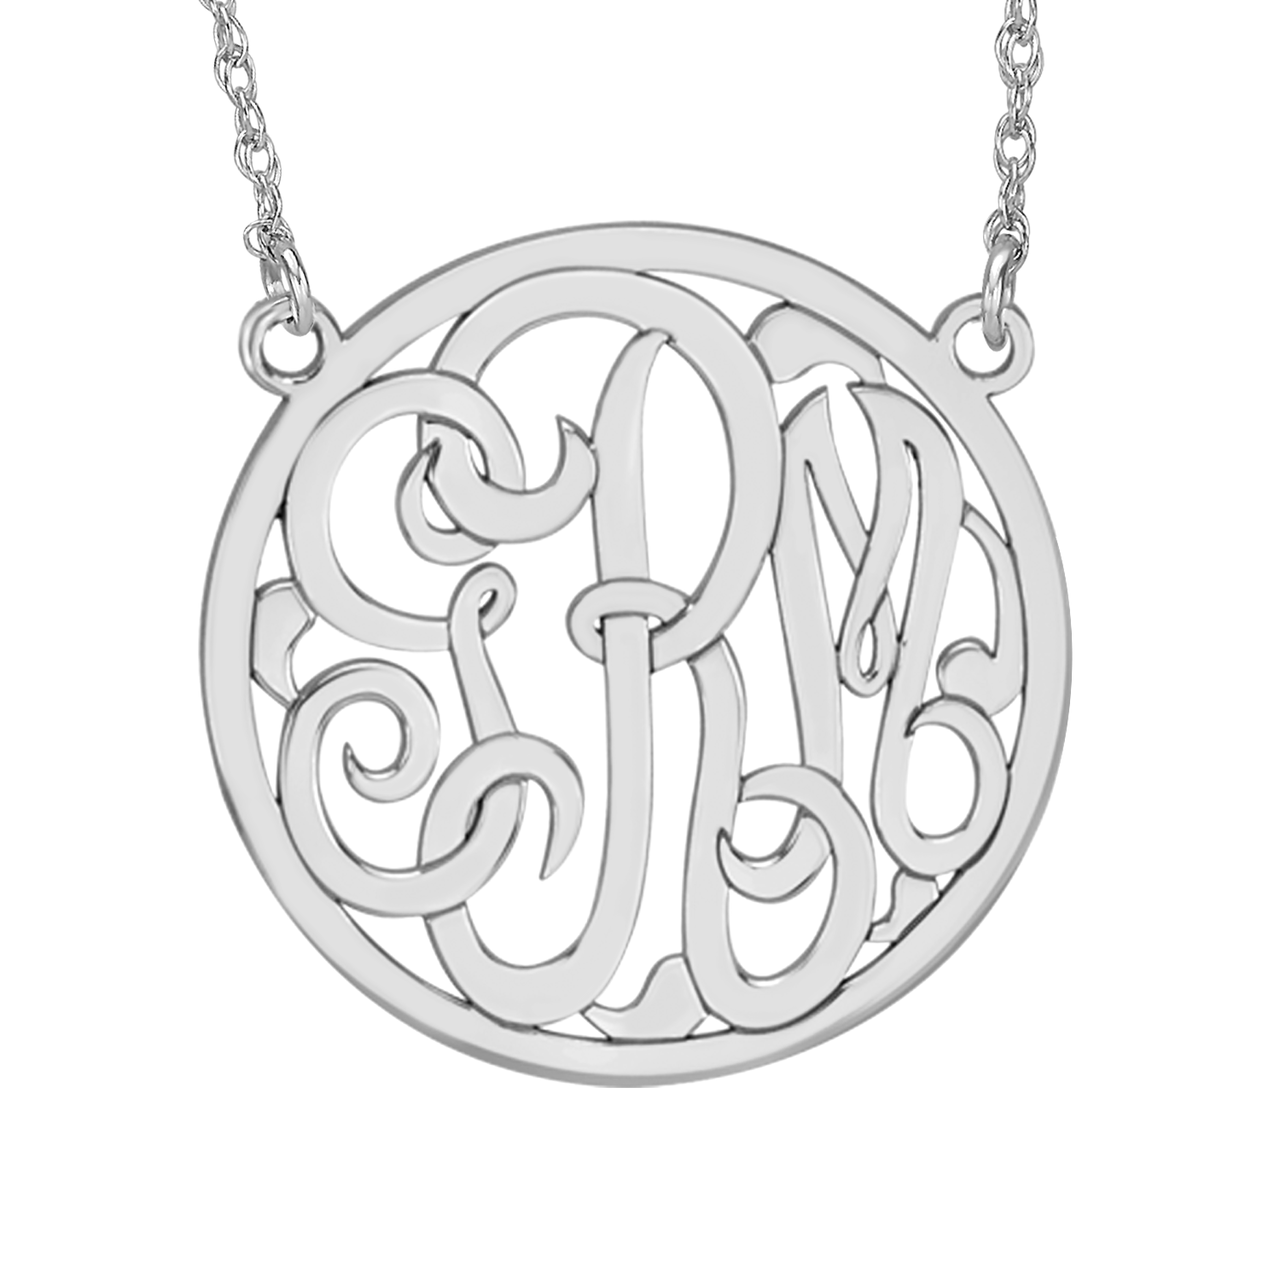 Fink's 40mm Classic Bordered 14k White Gold Monogram Necklace